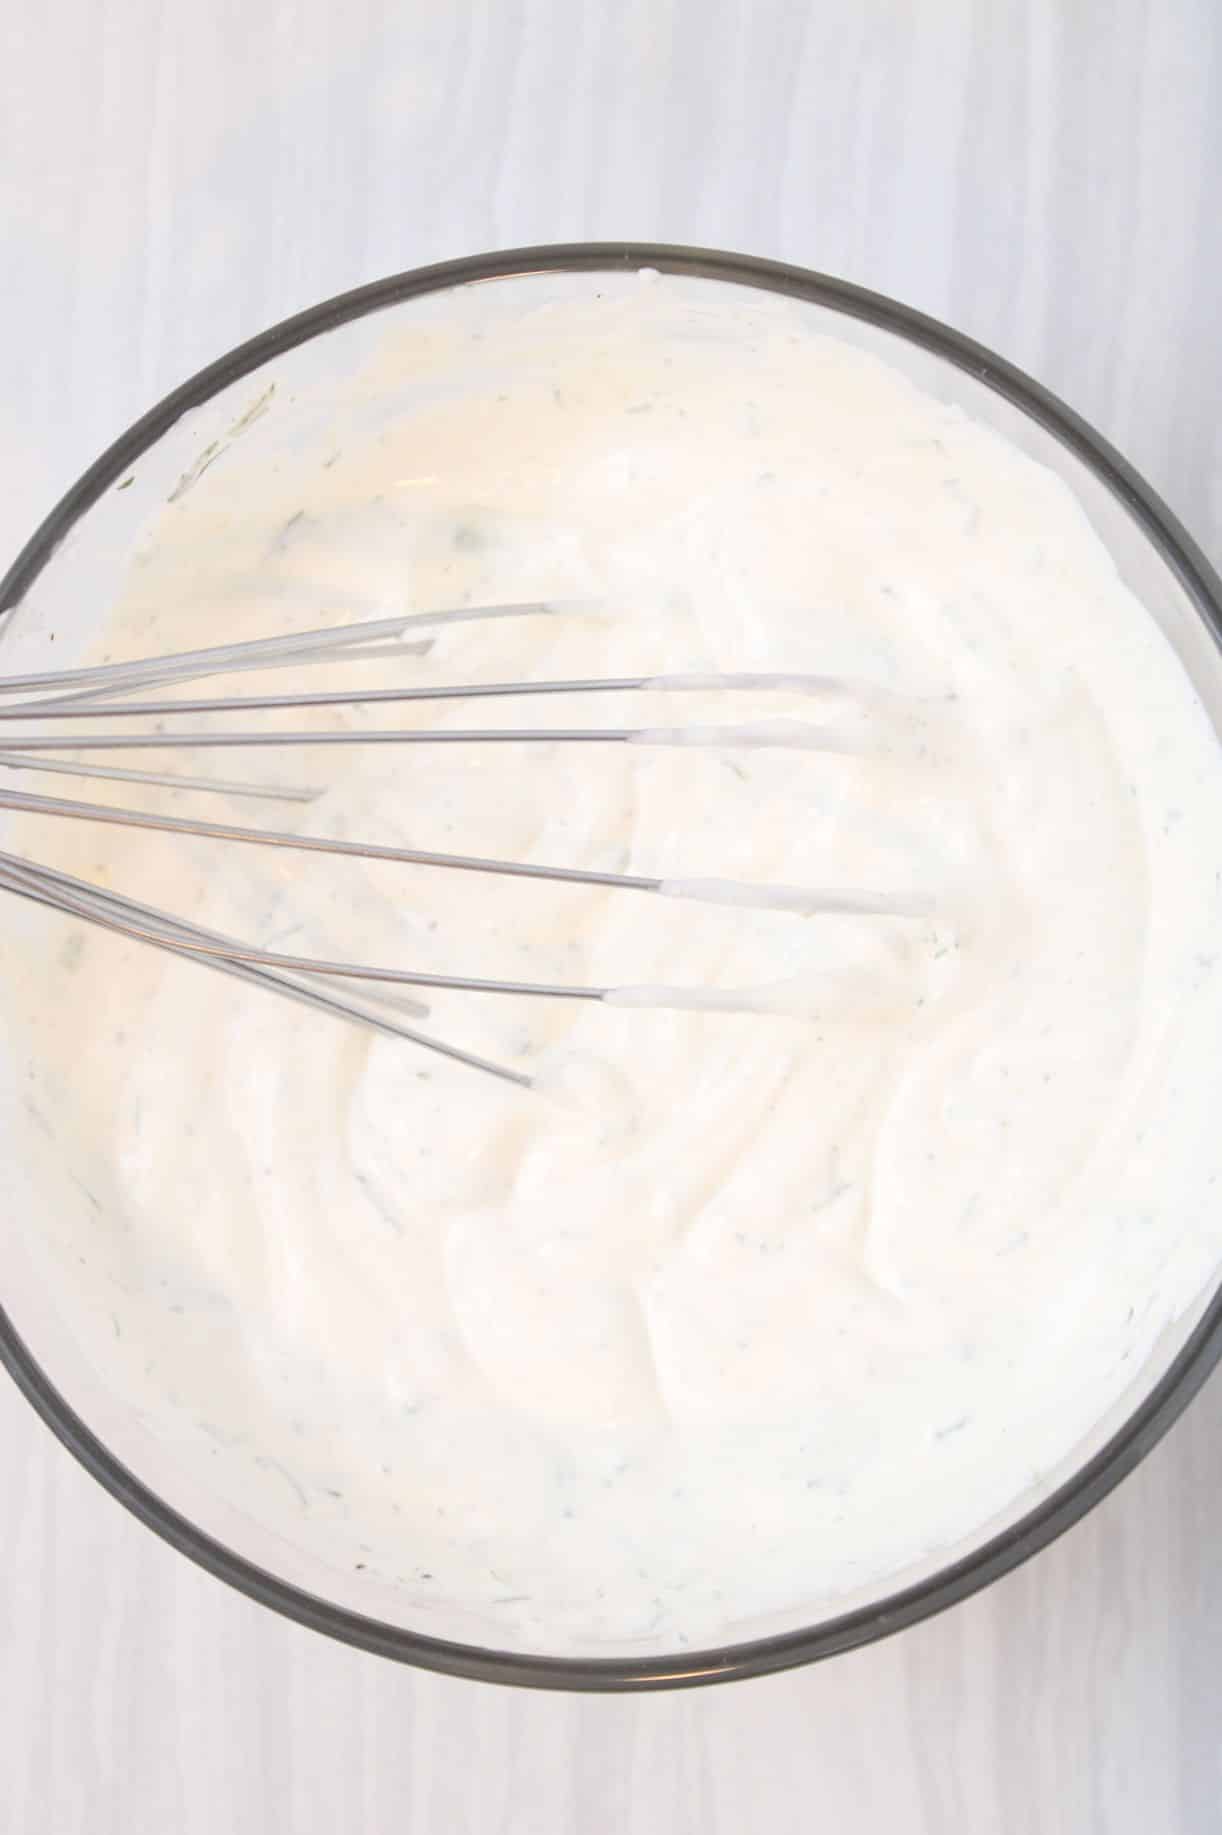 A whisk whisking together ingredients in a large glass bowl